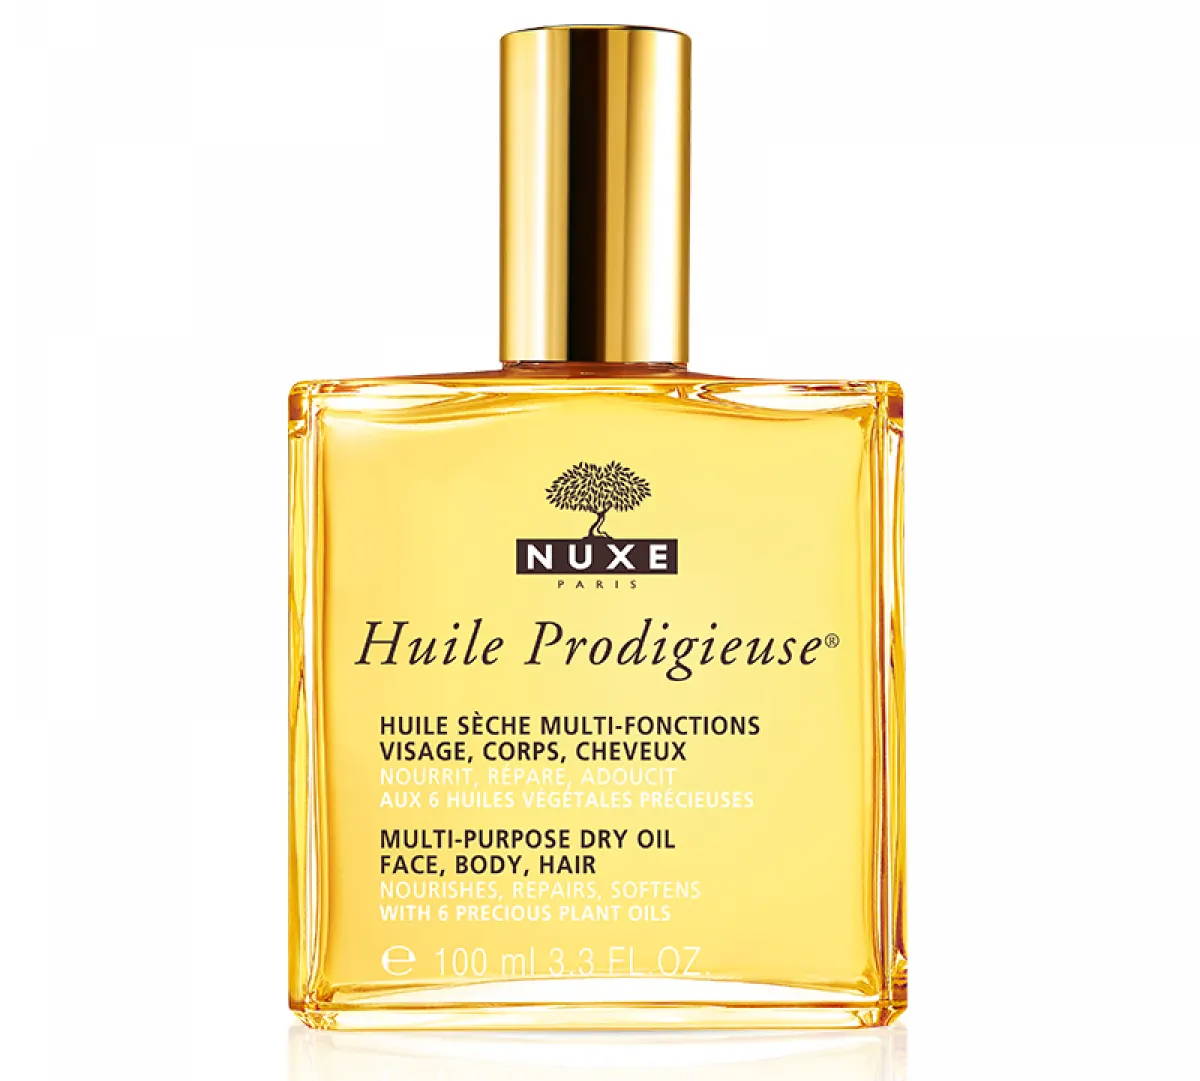 Dry Oil Nuxe body face and hair